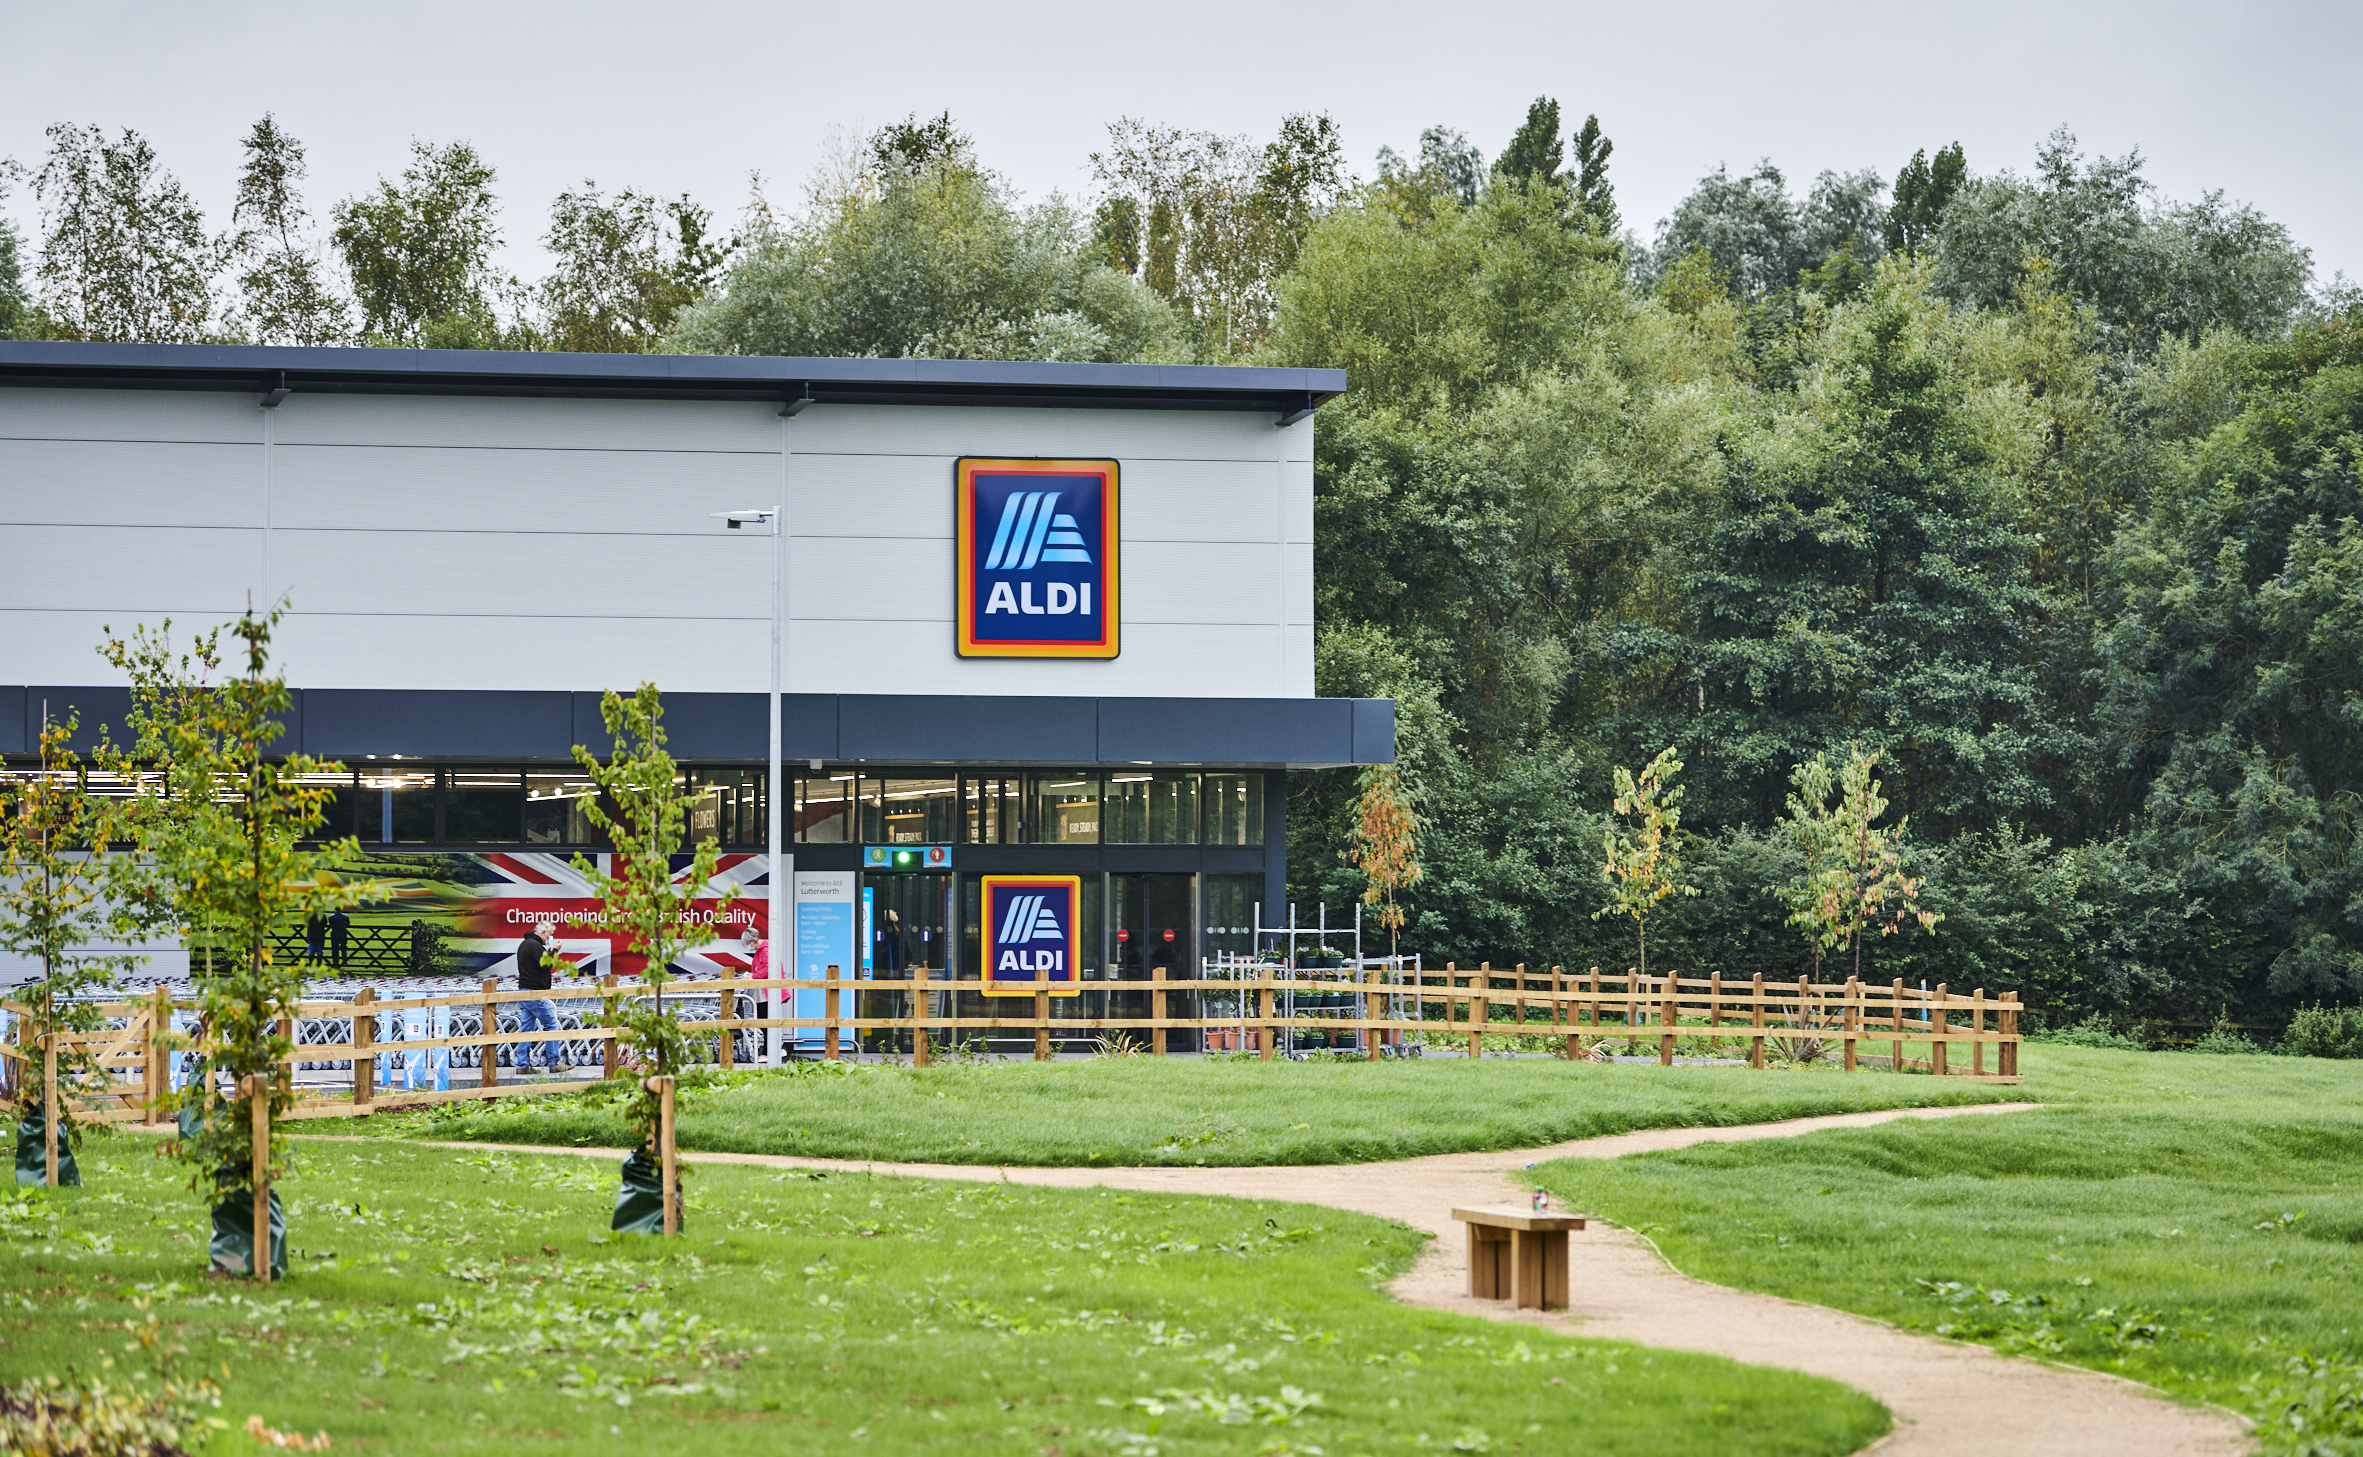 NEWS | Aldi confirms Christmas opening hours with stores in the UK closing for three days over the festive period – MORE DETAILS